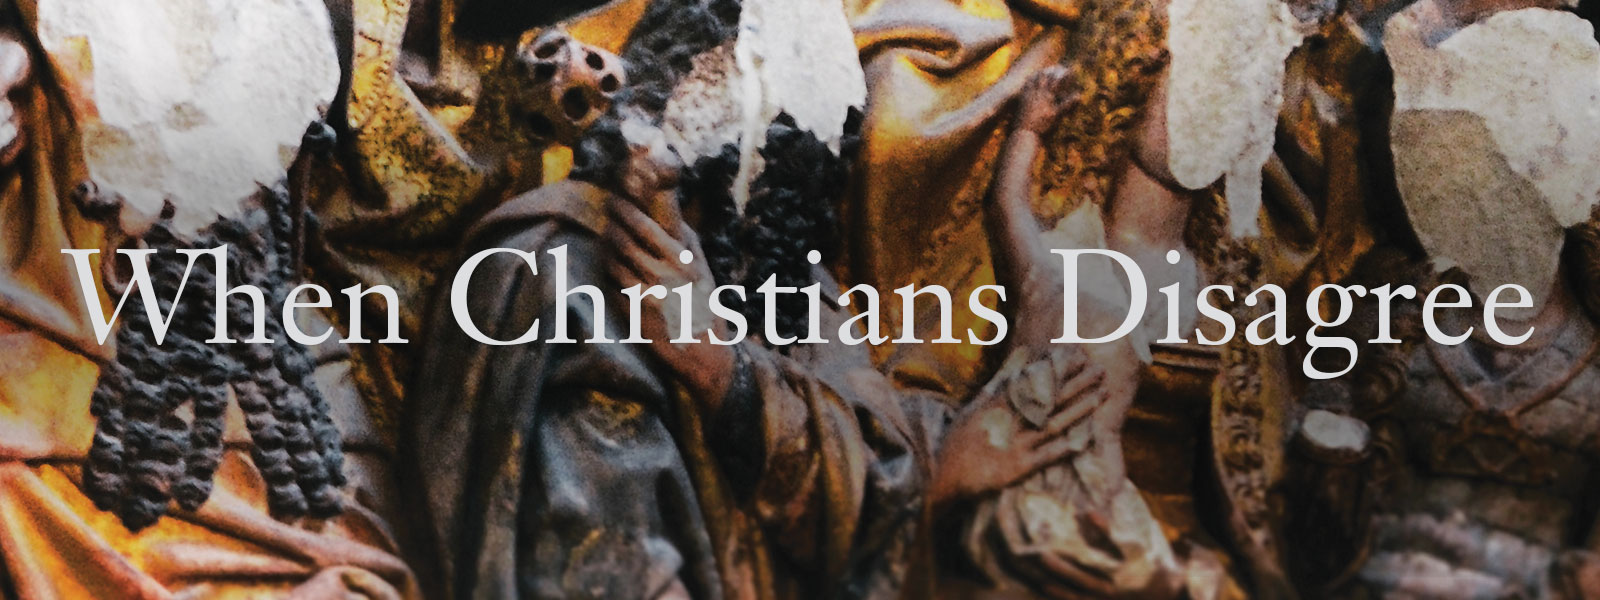 Since the beginning of Christendom, Christians have disagreed. They’ve disagreed about doctrines and politics, social and personal questions, and the list could go on. Our day is no different. Much like iconoclasts defacing artwork in the 1500s, in our disagreements waged on the social feeds of Facebook and Twitter today, we Christians continue to wrestle with the importance of disagreeing well with one another. The following faculty conversation weighs in on this question of disagreement and provides thoughtful insight into the nature of disagreement as part of the Christian life.